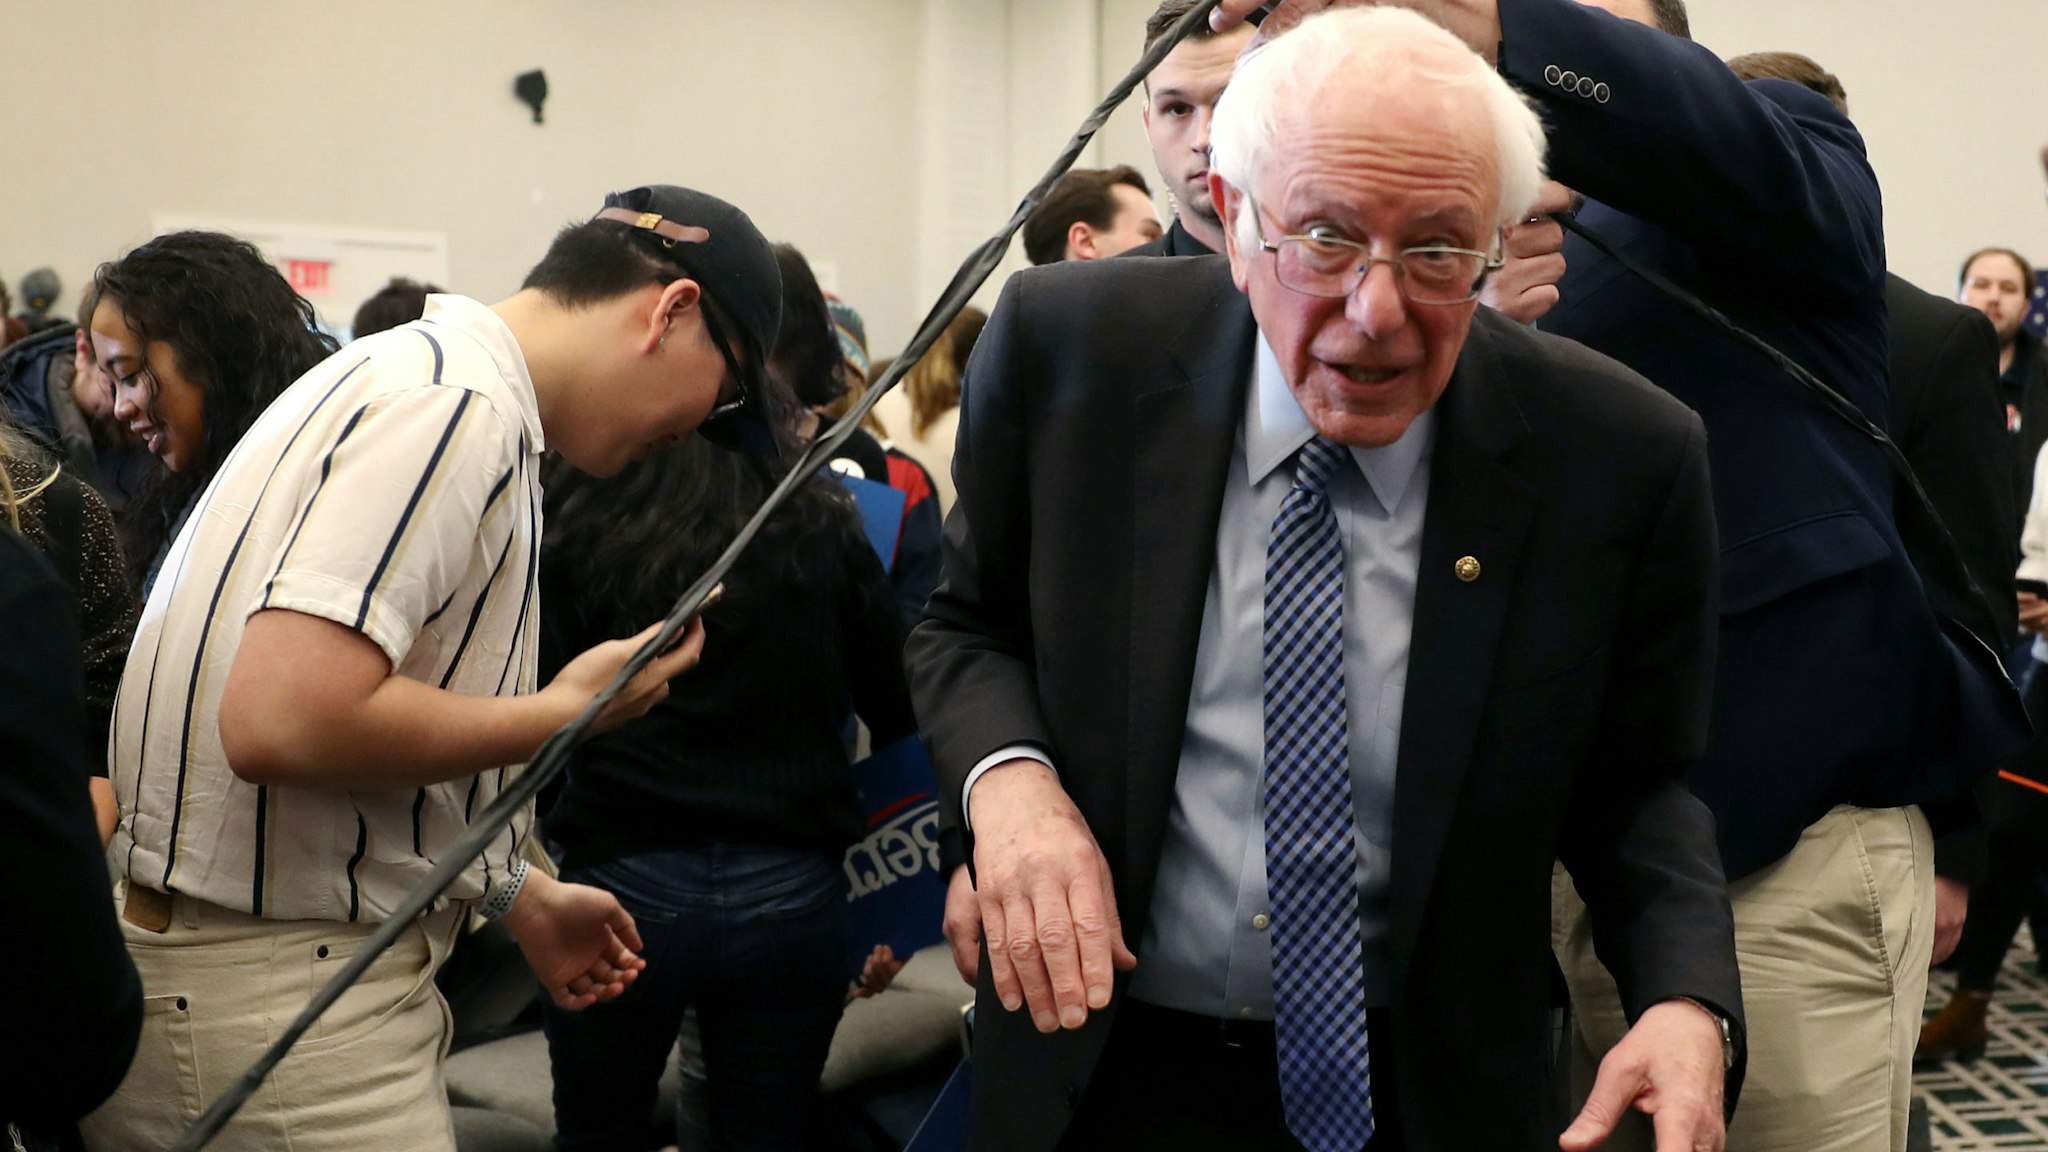 HANOVER, NEW HAMPSHIRE - FEBRUARY 09: Democratic presidential candidate Sen. Bernie Sanders (I-VT) ducks under a rope line during a Town Hall at the Hanover Inn Dartmouth on February 09, 2020 in Hanover, New Hampshire. Mr. Sanders is campaigning before the primary on February 11. (Photo by Joe Raedle/Getty Images)